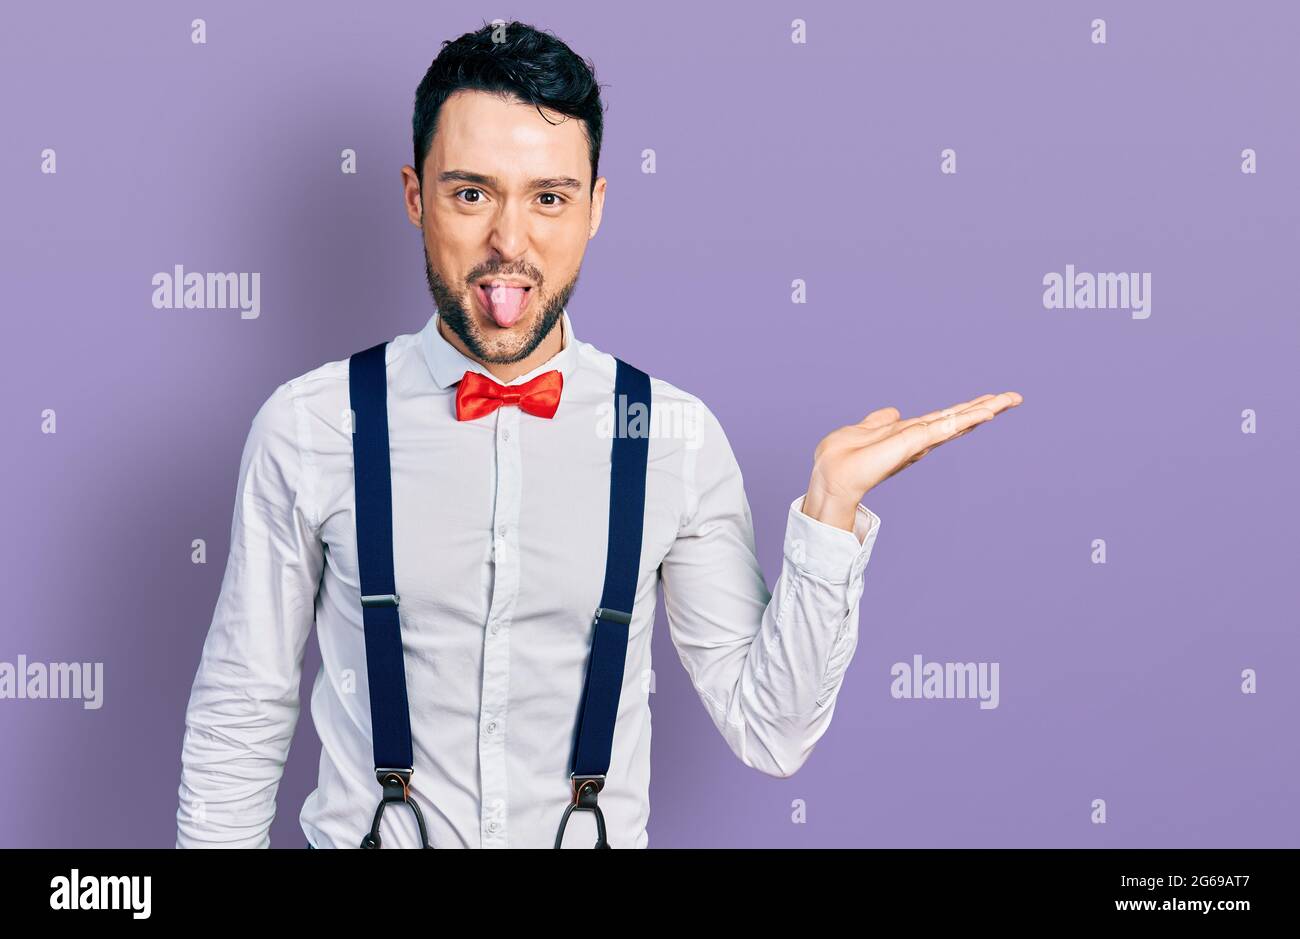 Man Mouth Open Showing Tongue High Resolution Stock Photography and ...